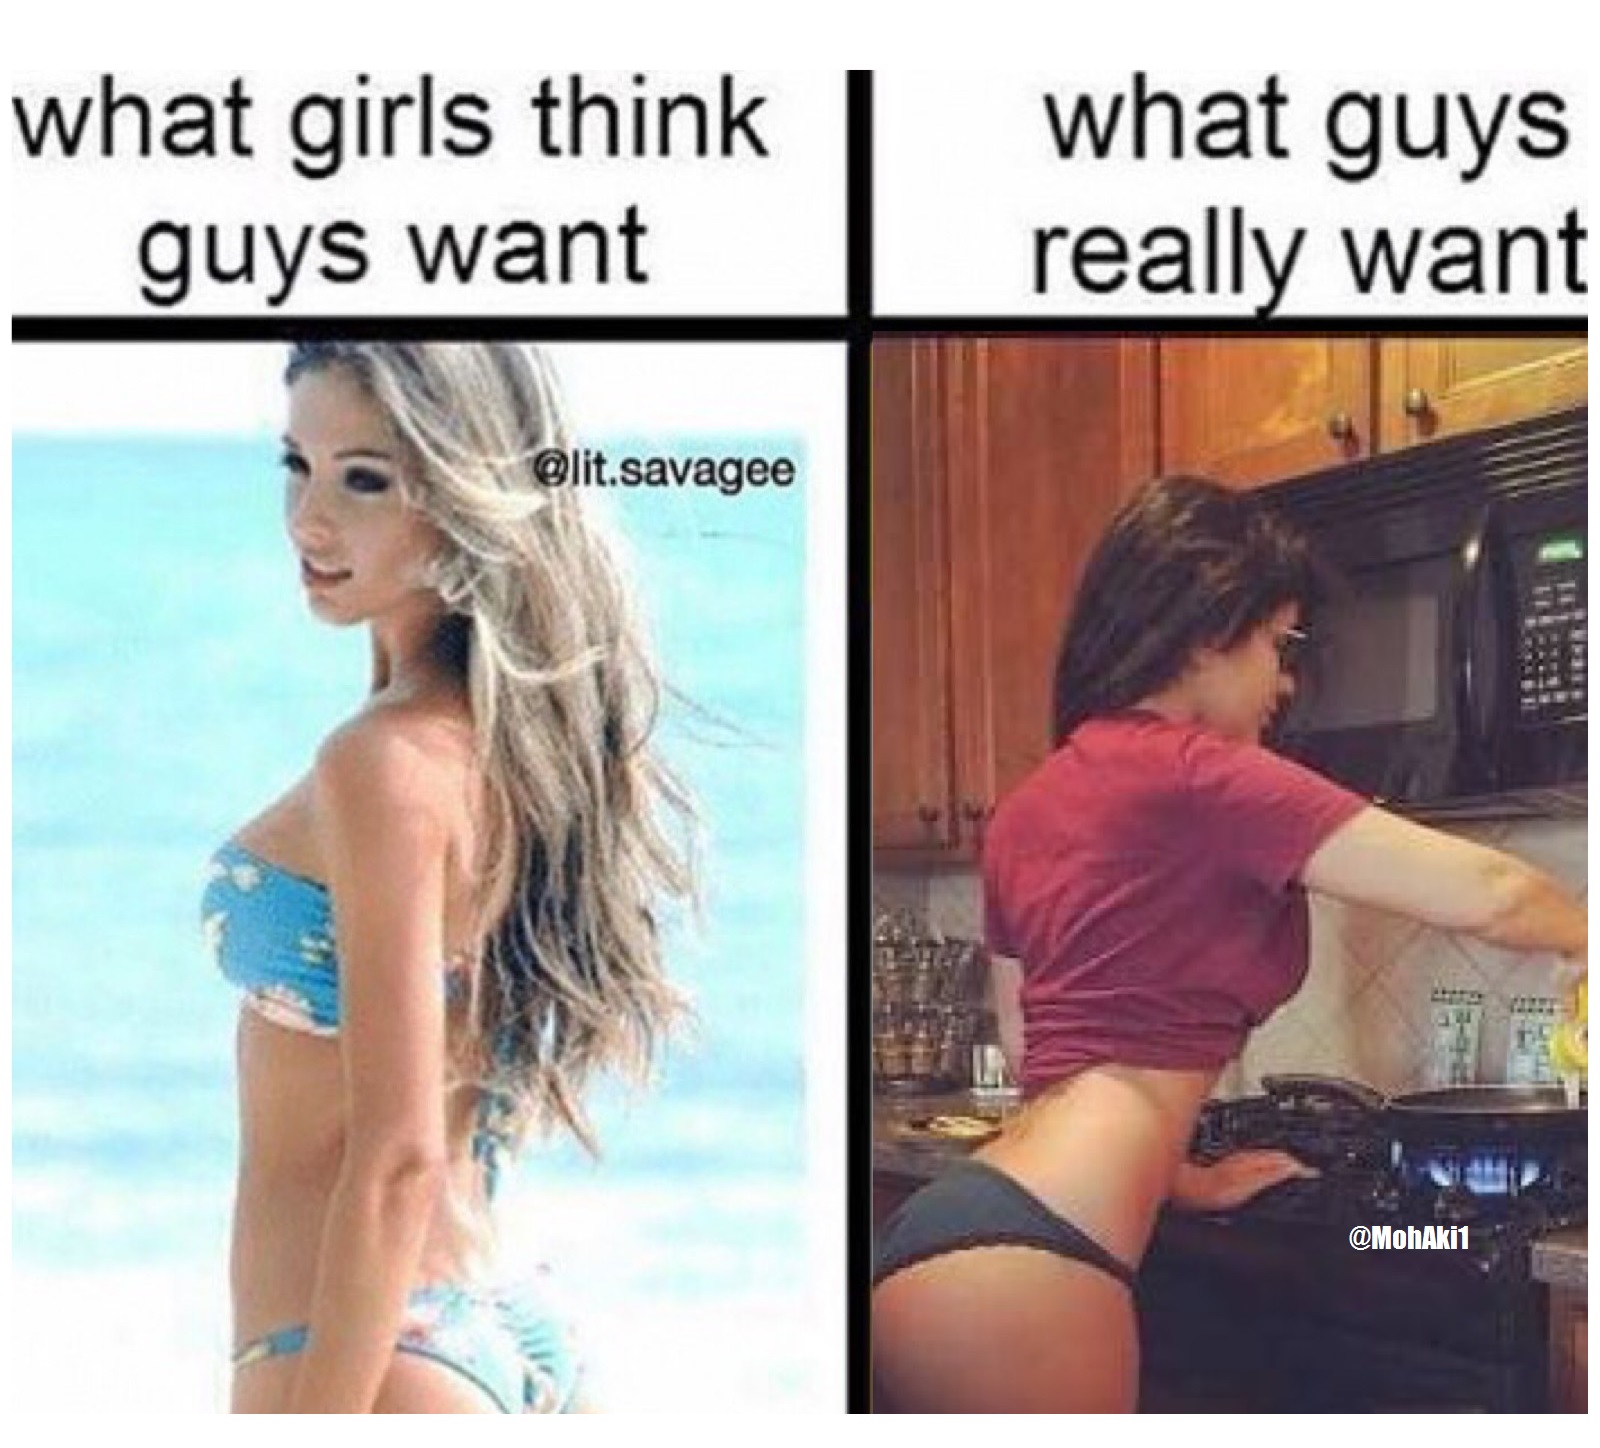 girls think guys want meme - what girls think guys want what guys really want .savagee MohAkit